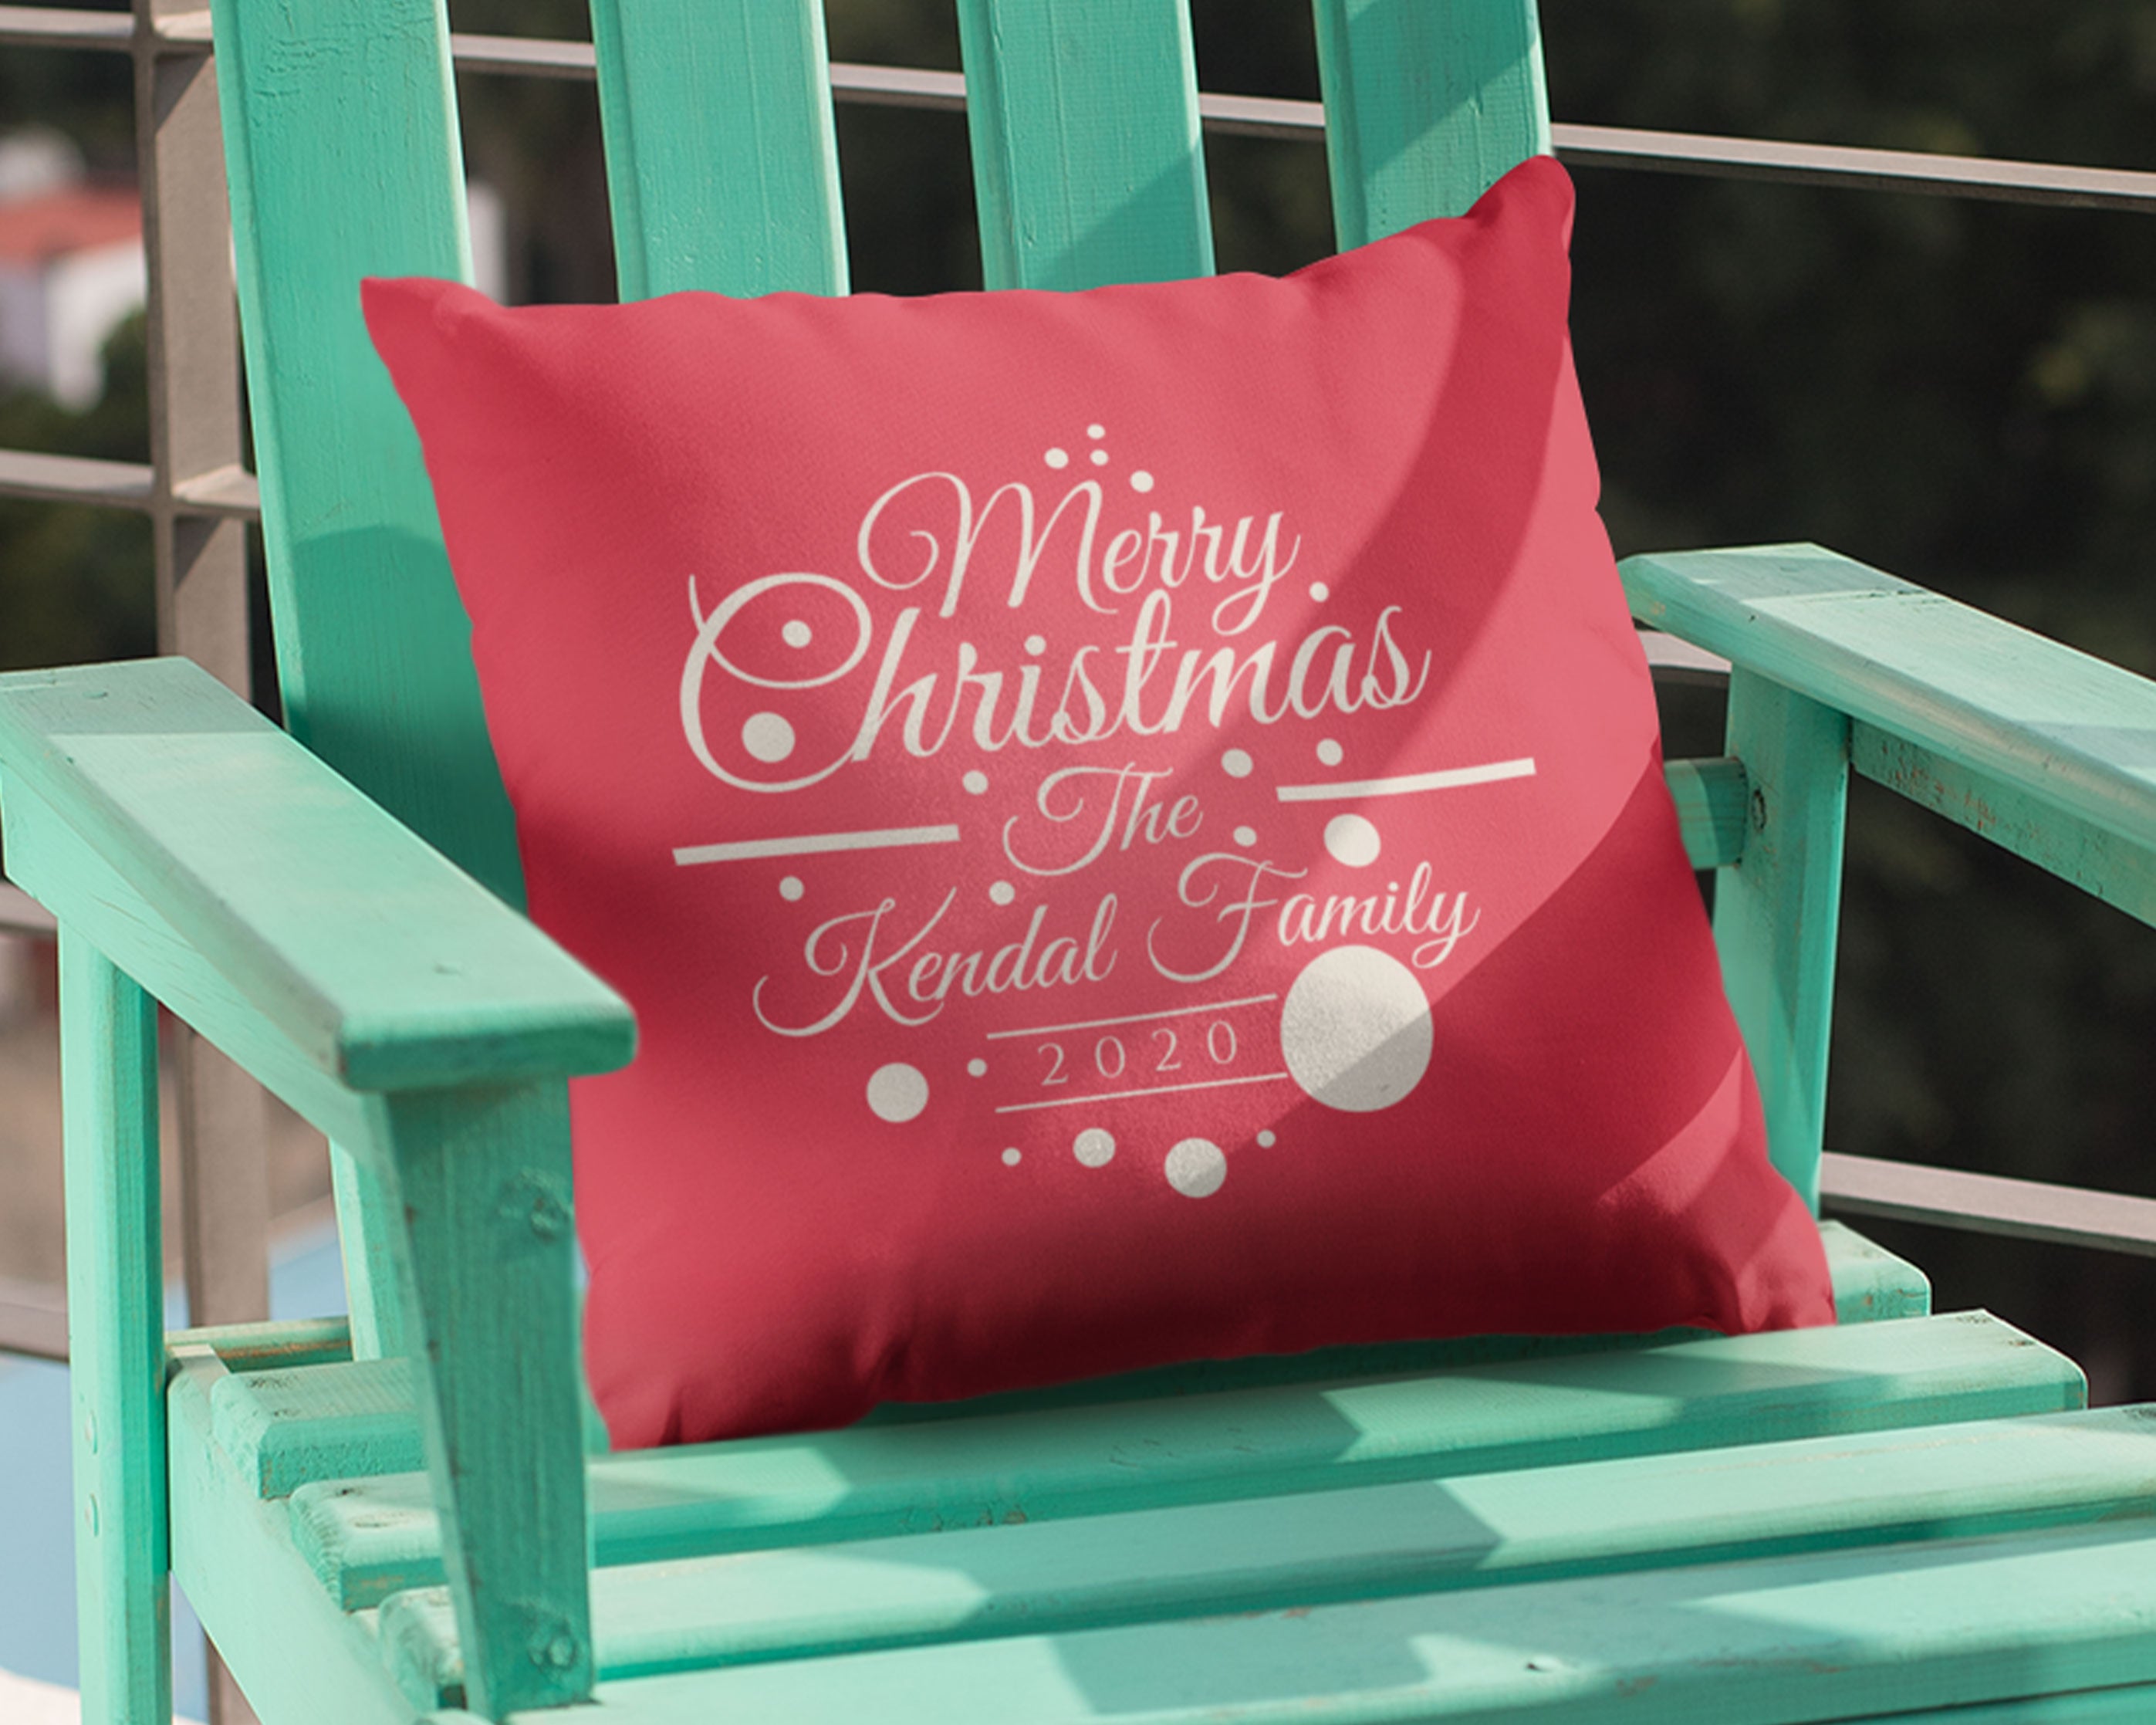 Merry Christmas 2020 - Personalized Pillow Case